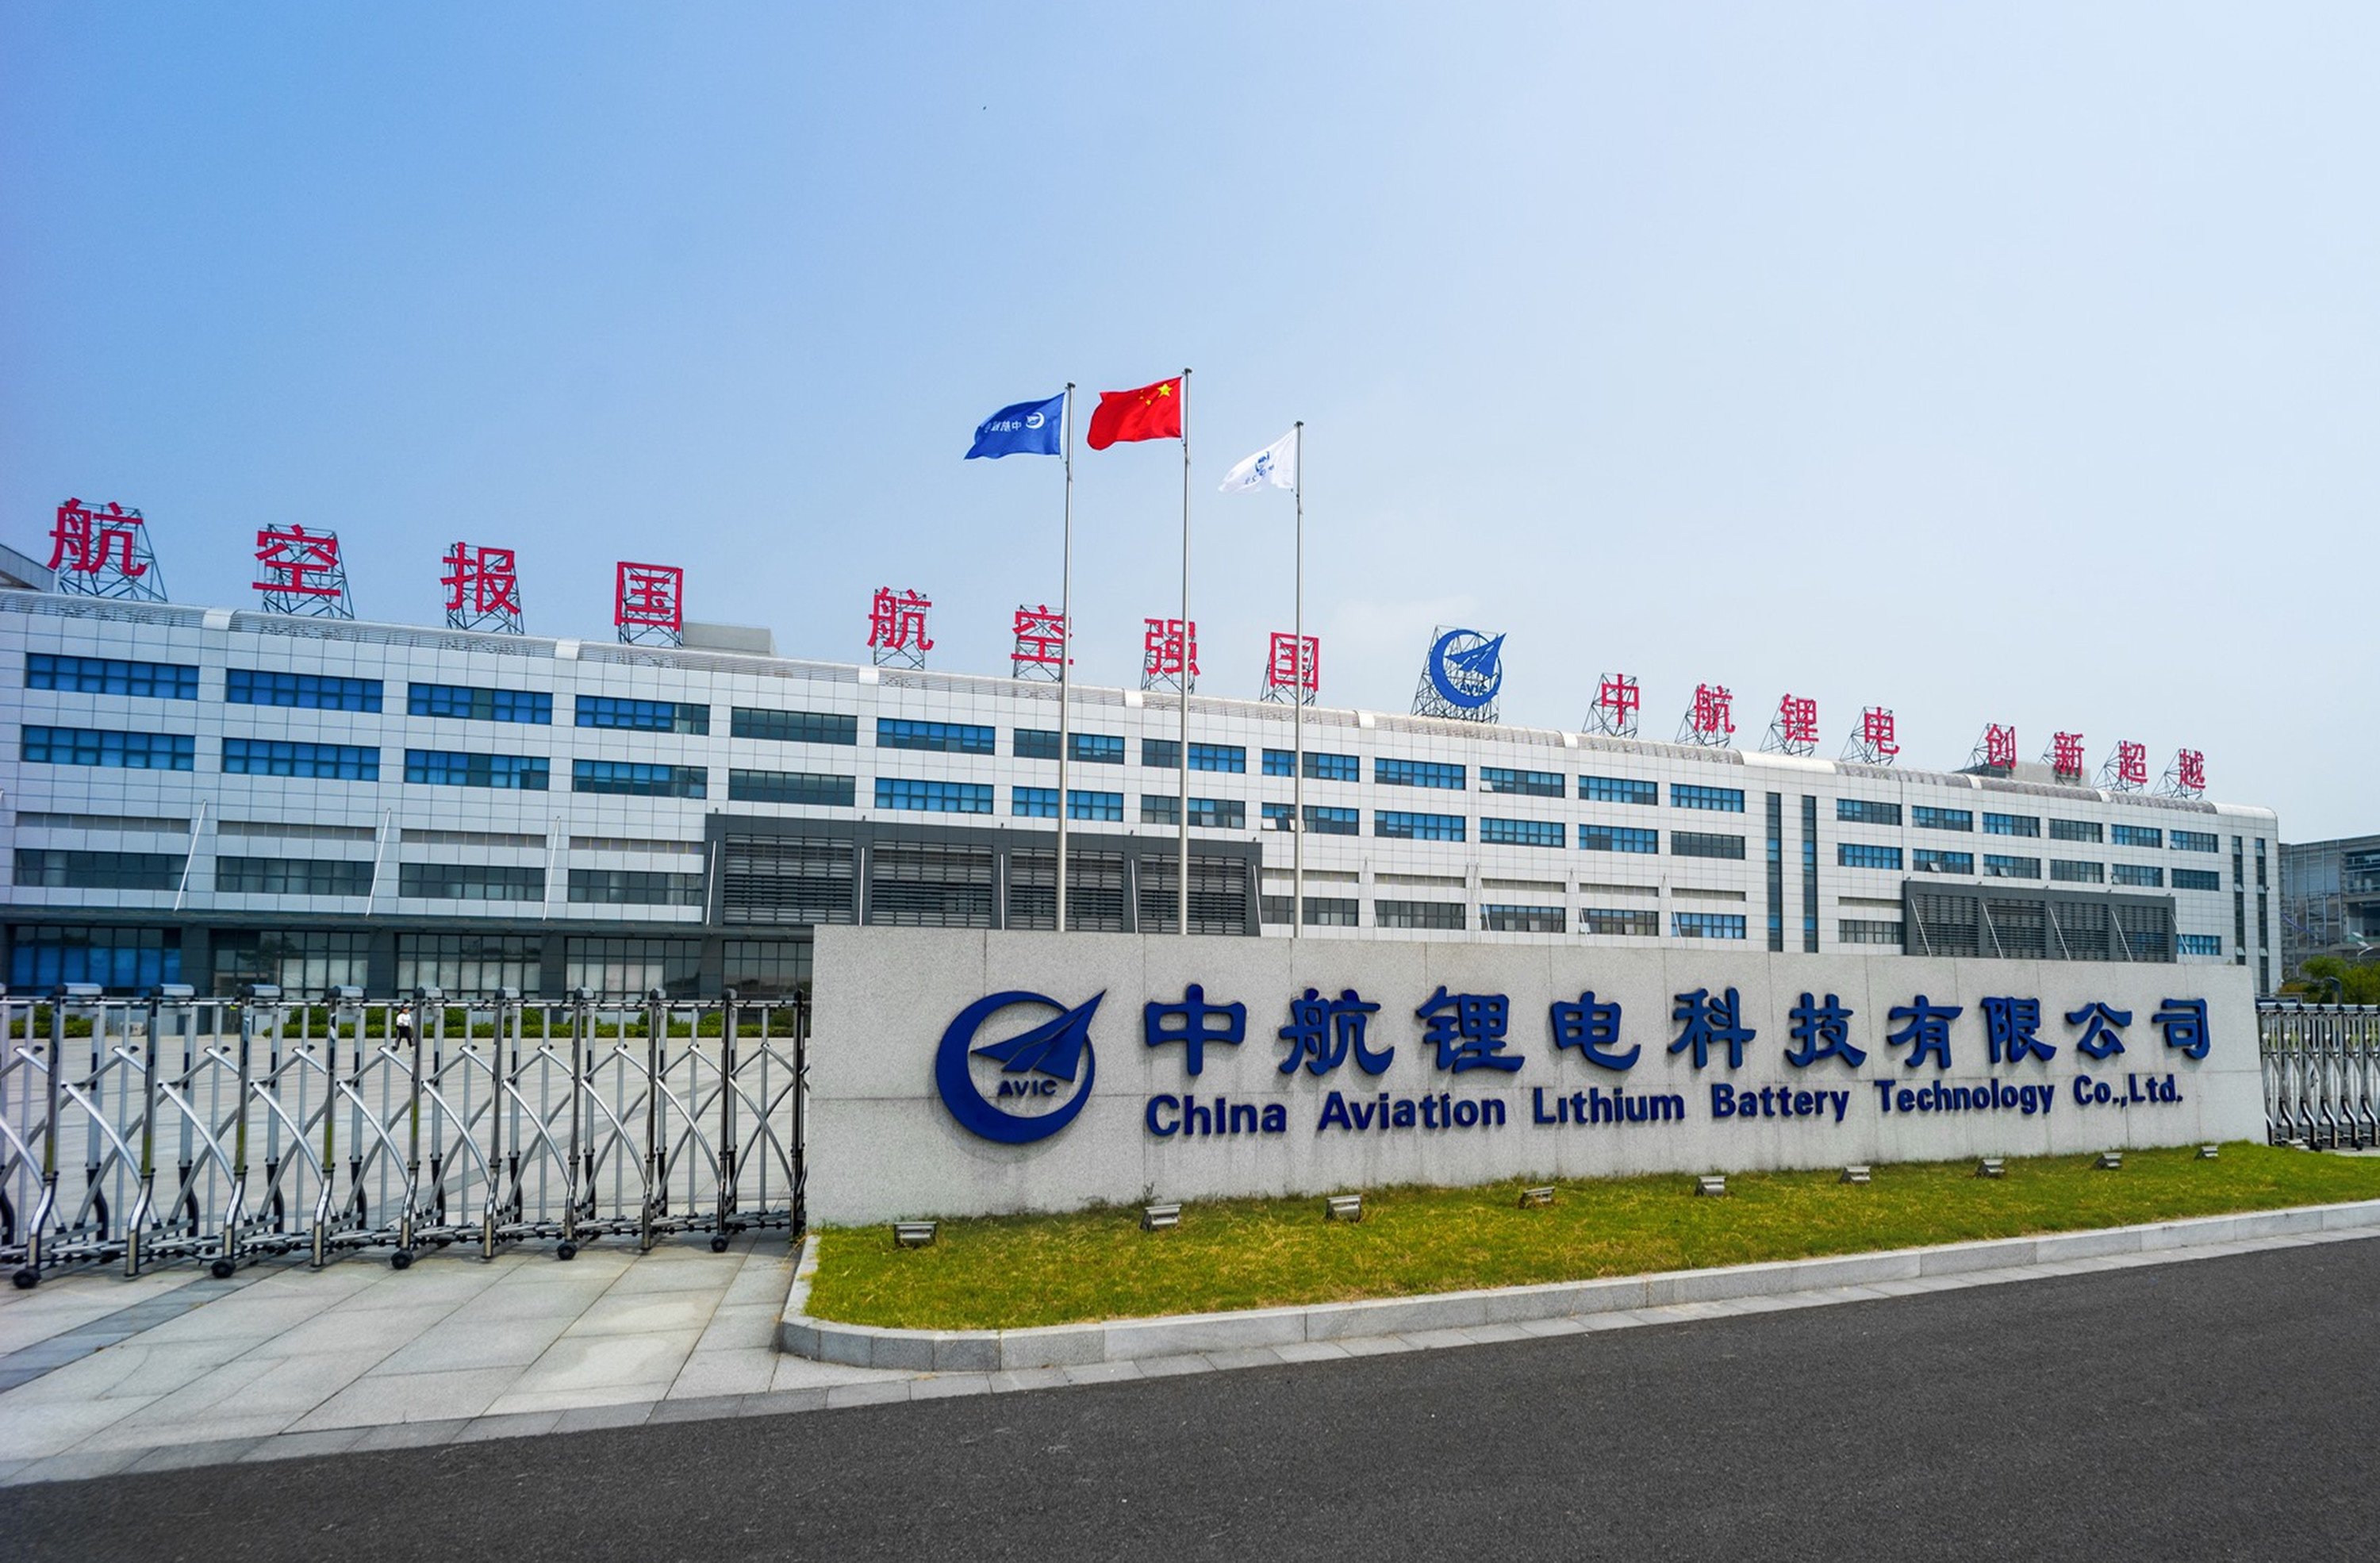 China Aviation Lithium Battery reported year-on-year sales growth of more than 100 per cent for three consecutive years from 2019 to 2021 amid a boom in battery-powered car sales in China. Photo: Facebook